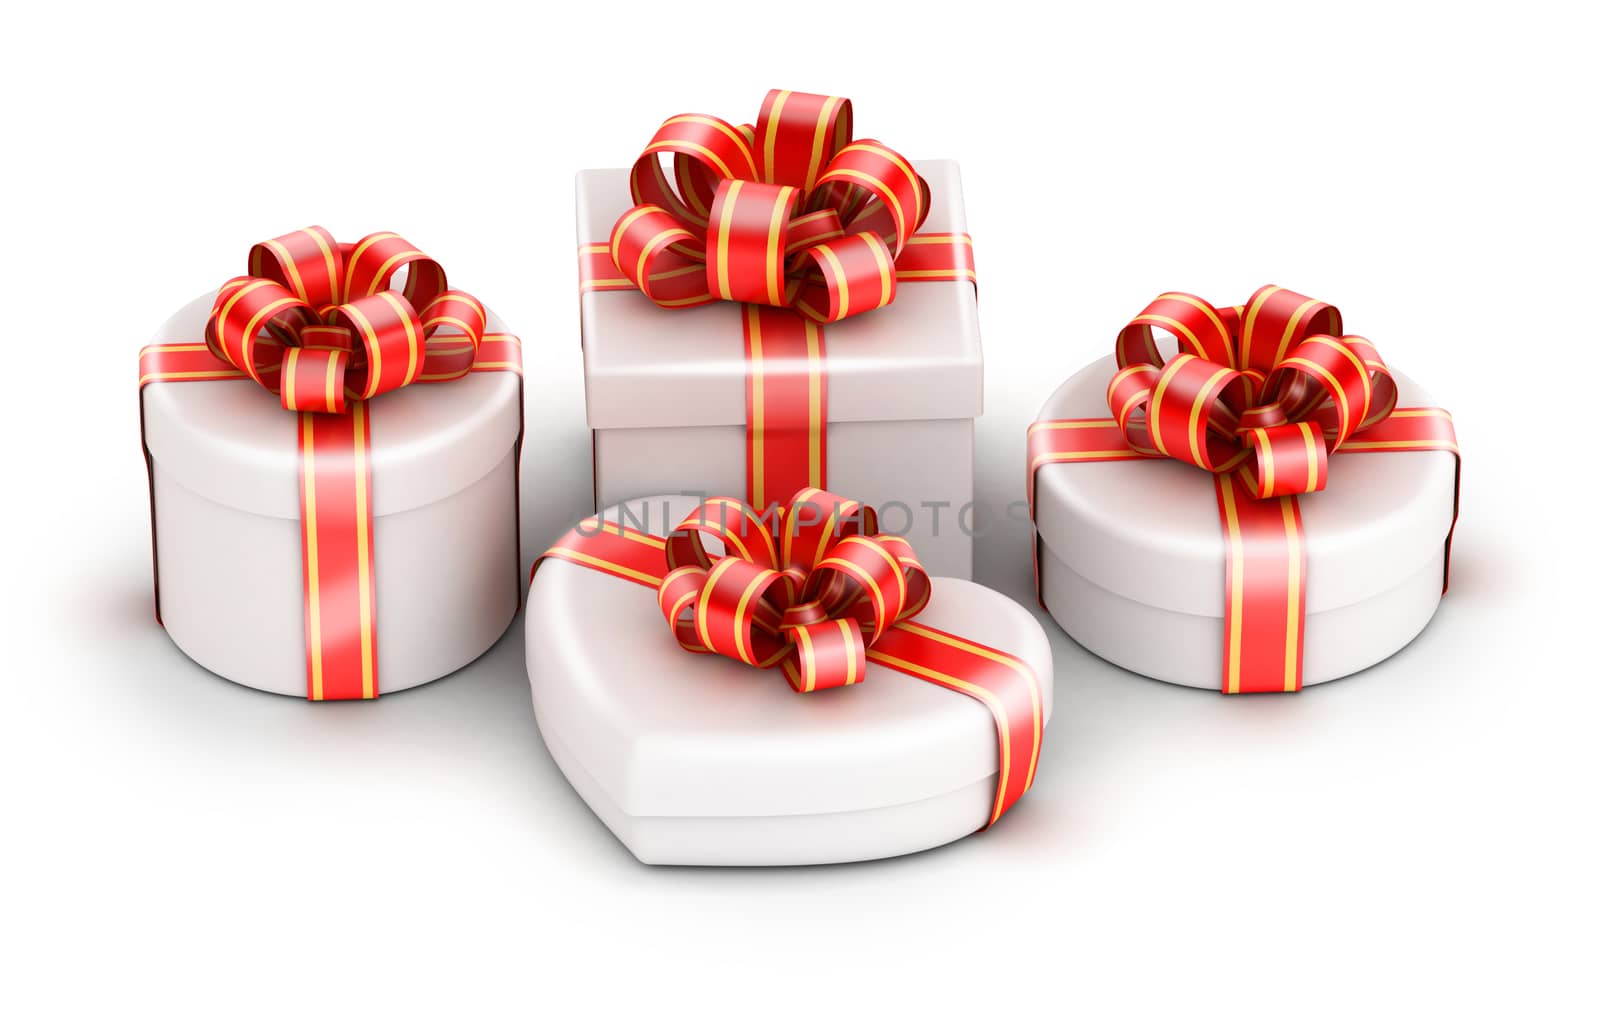 Different shape gift boxes by iunewind